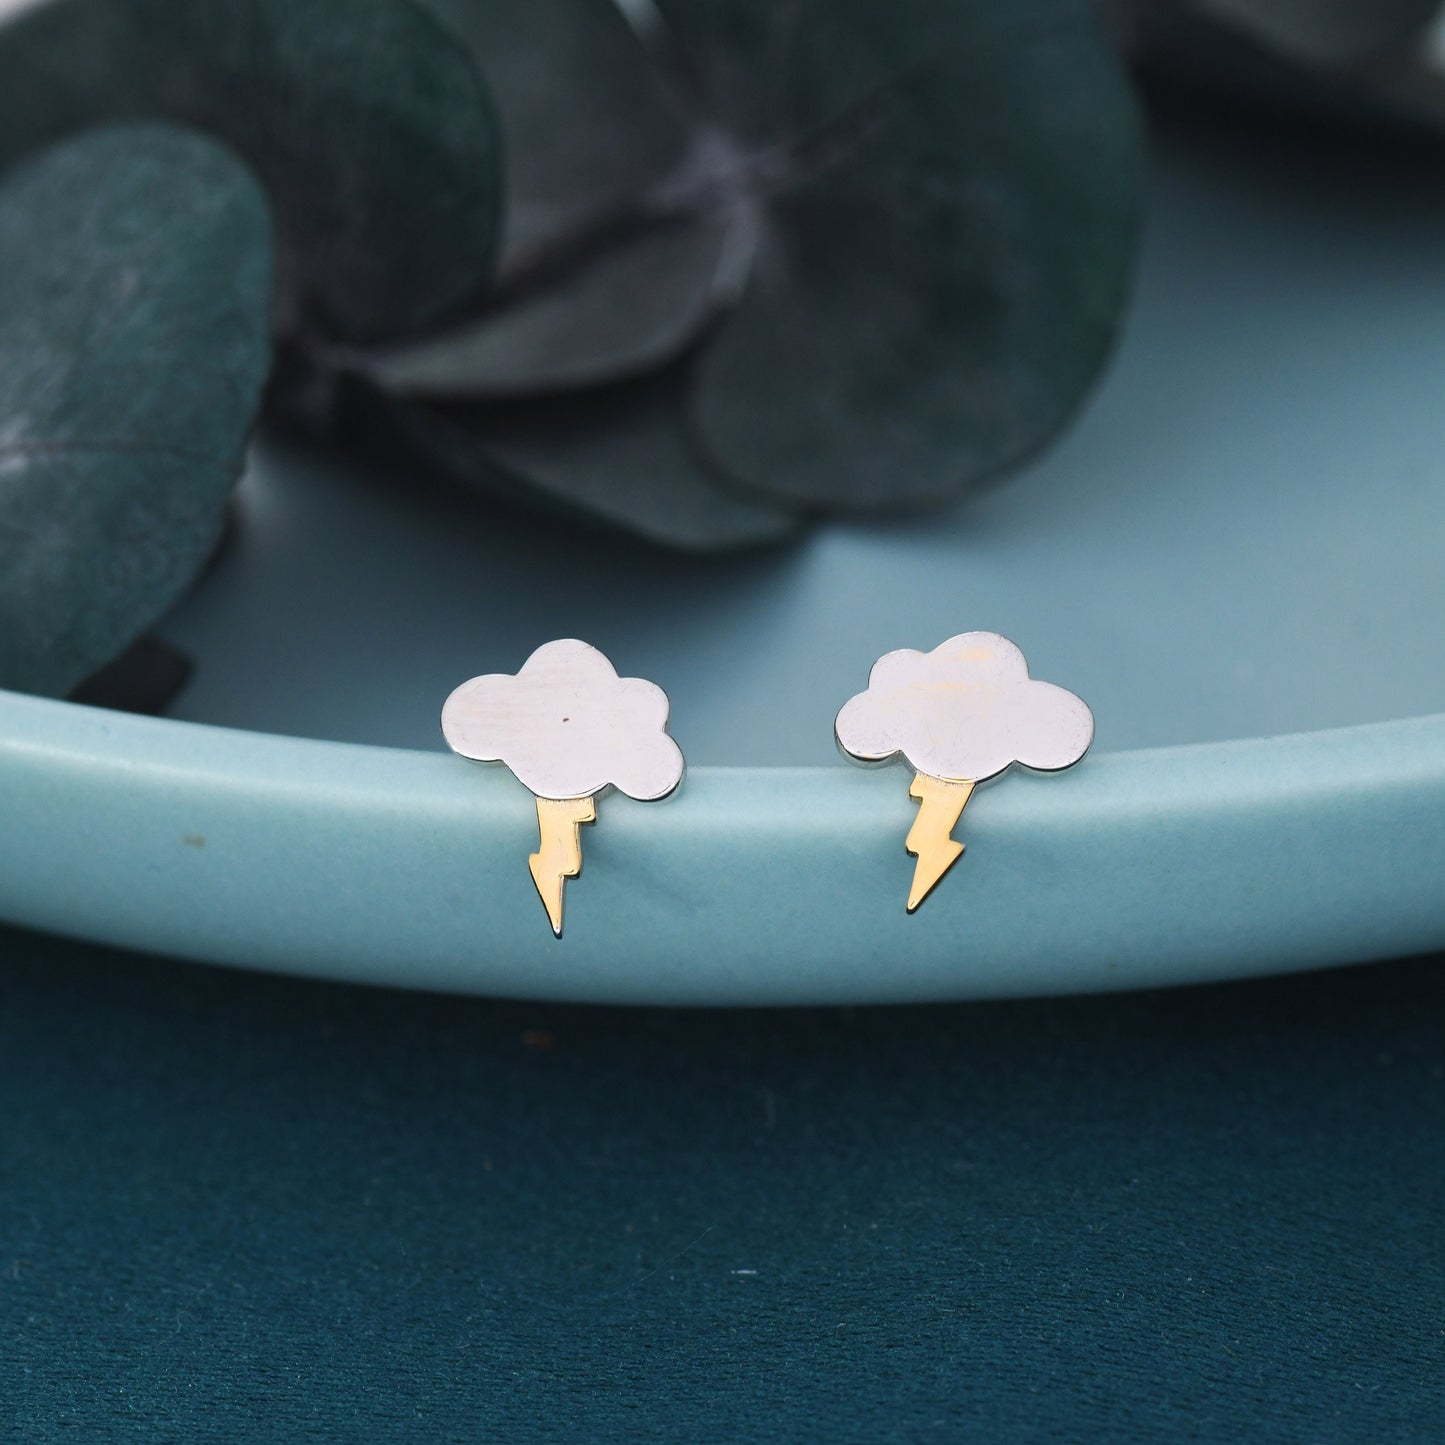 Dainty Little Cloud and Lightening Bolt Stud Earrings in Sterling Silver - Two Tone Gold and Silver Earrings -  Fun, Whimsical